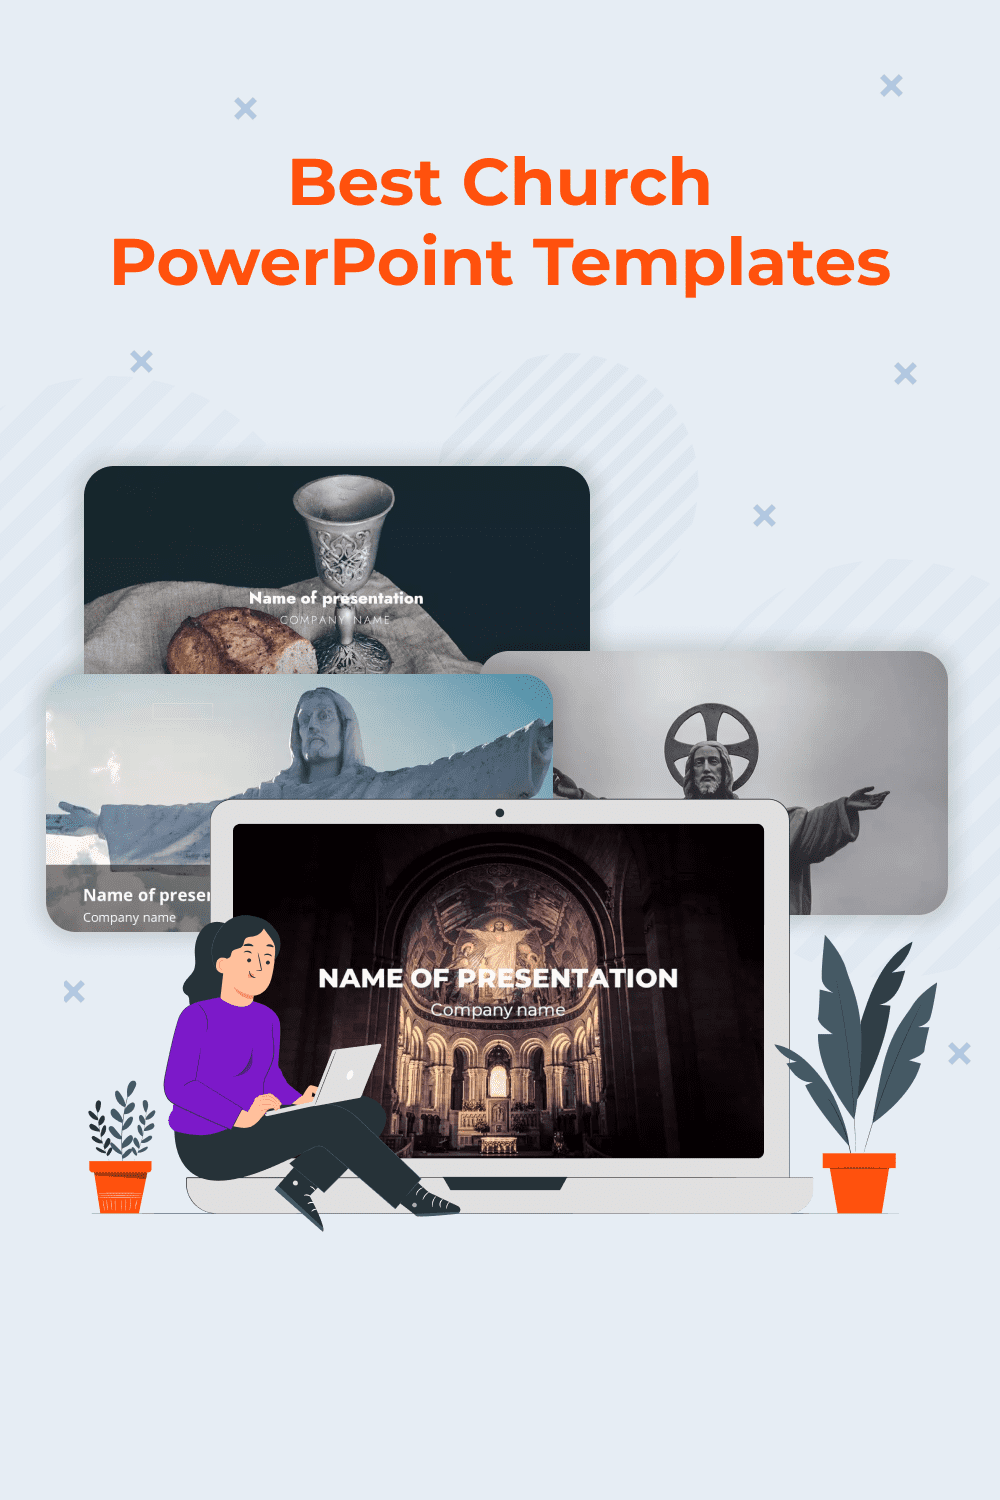 best church powerpoint templates 2022 free paid35 best church powerpoint templates 2022 free paid.